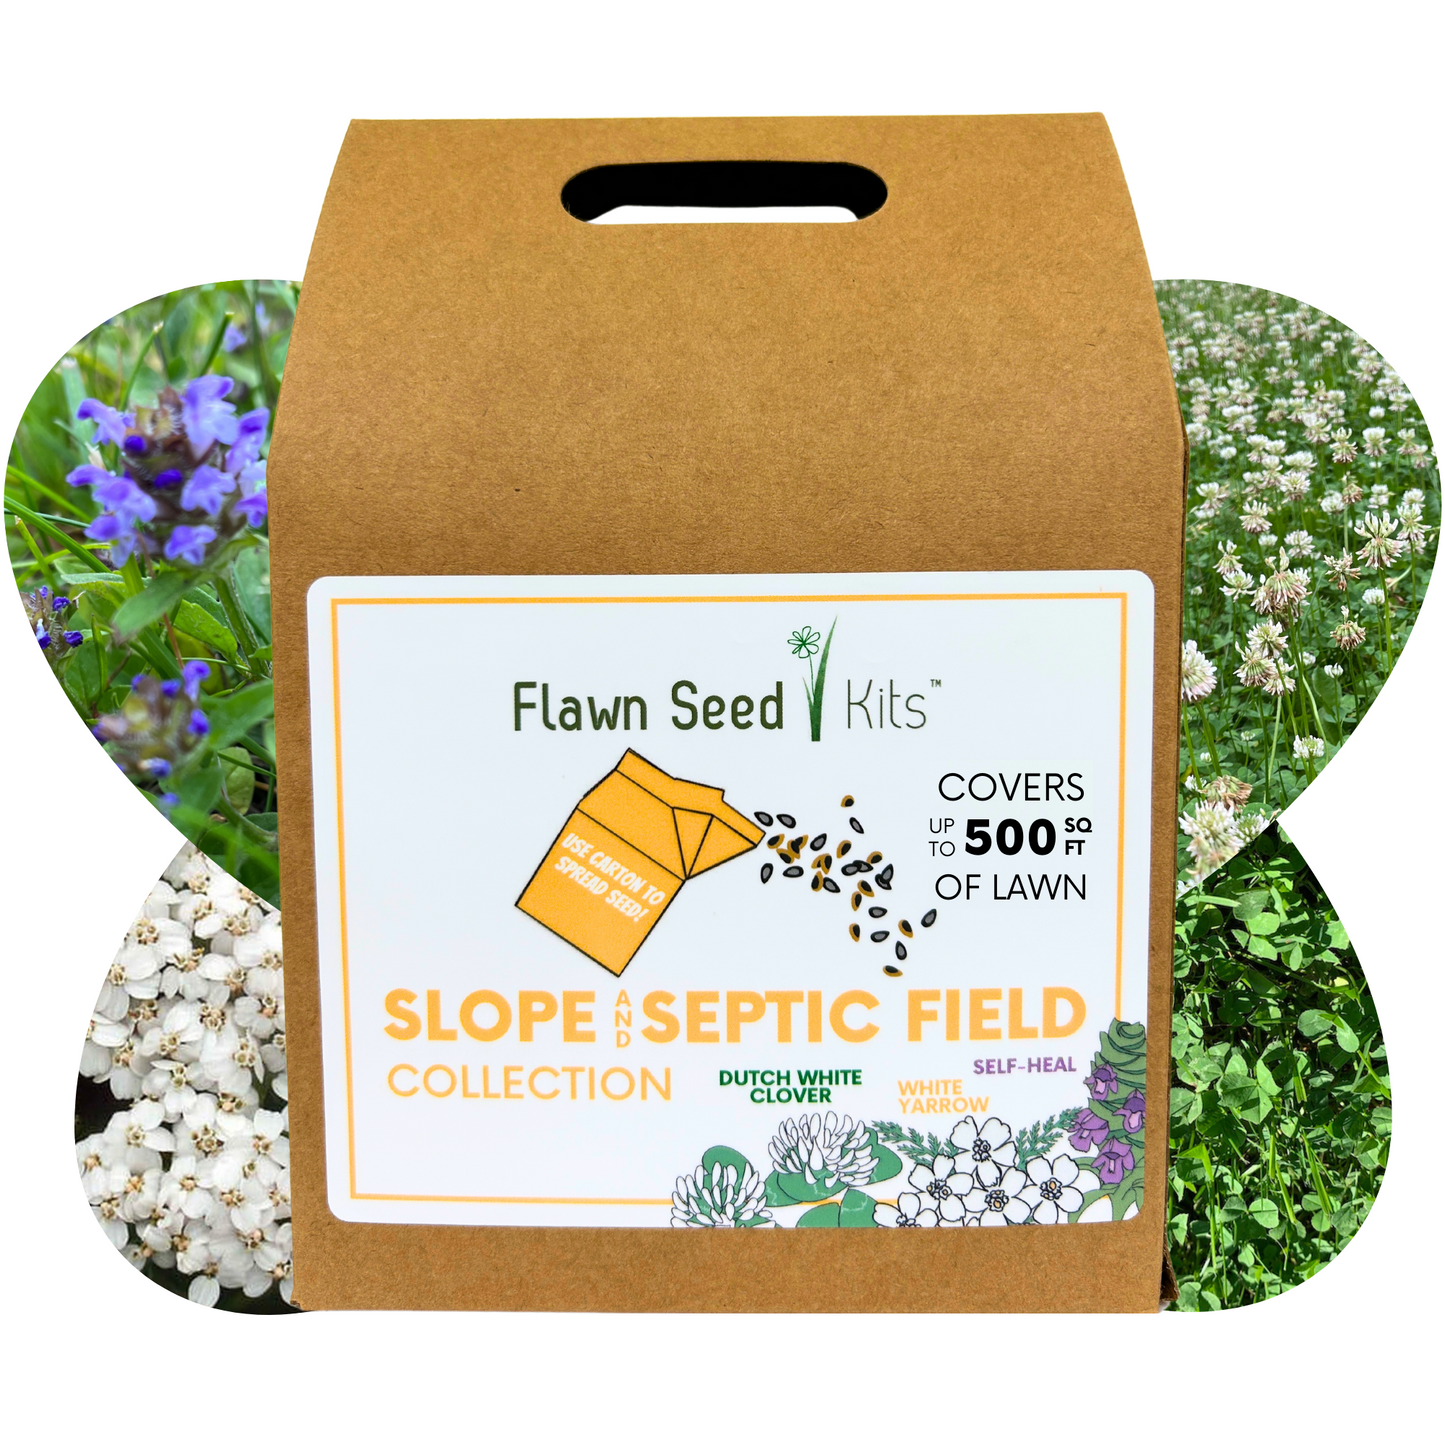 Slope/Septic System Kit with Dutch White Clover, Self-Heal & White Yarrow